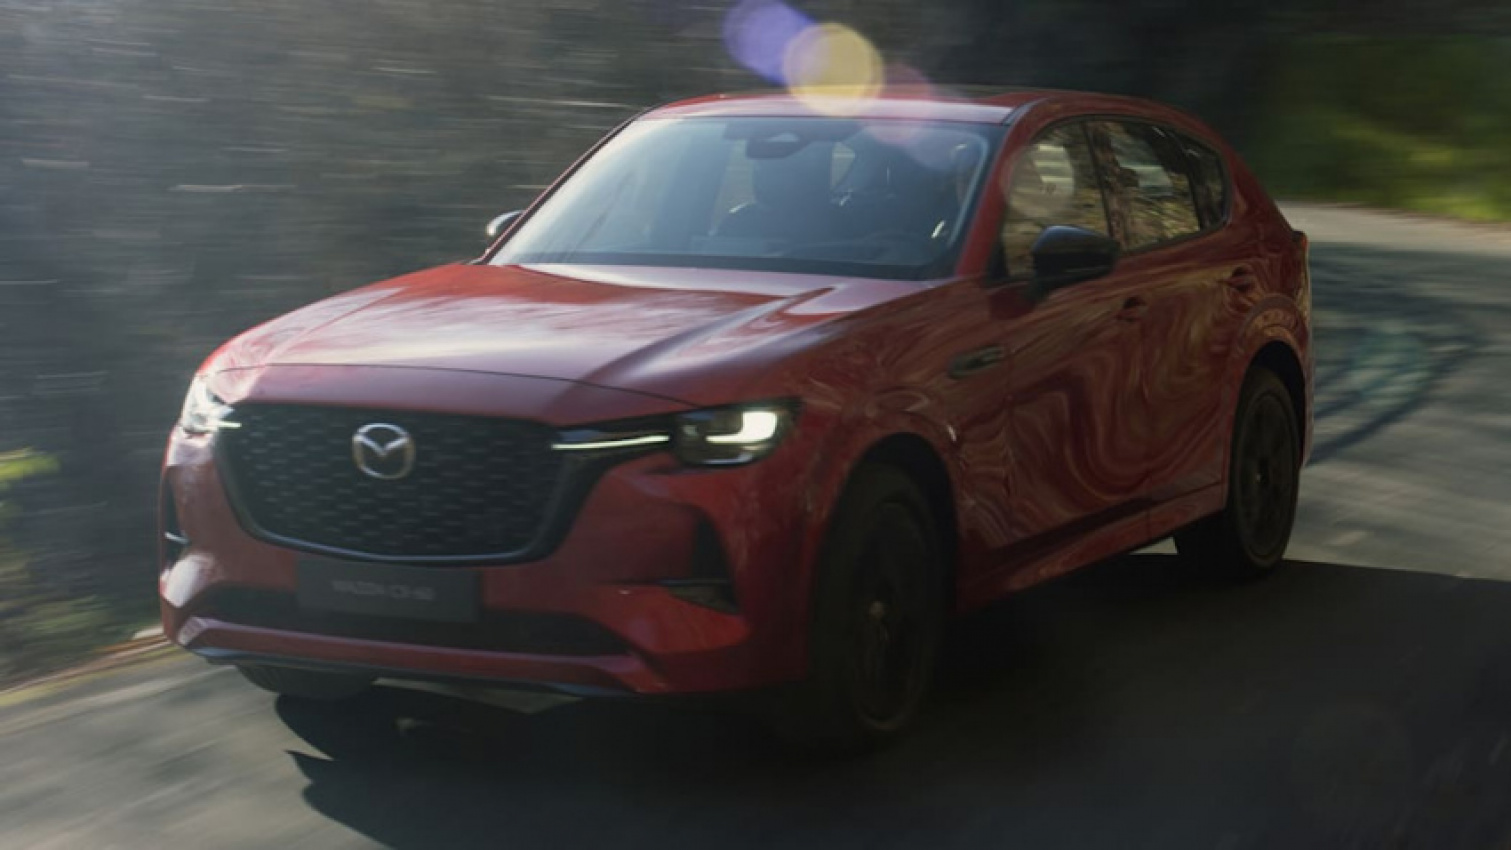 autos, cars, mazda, android, crossover, diesel vehicles, green, hybrid, android, mazda cx-60 revealed with rear-drive platform, phev powertrain